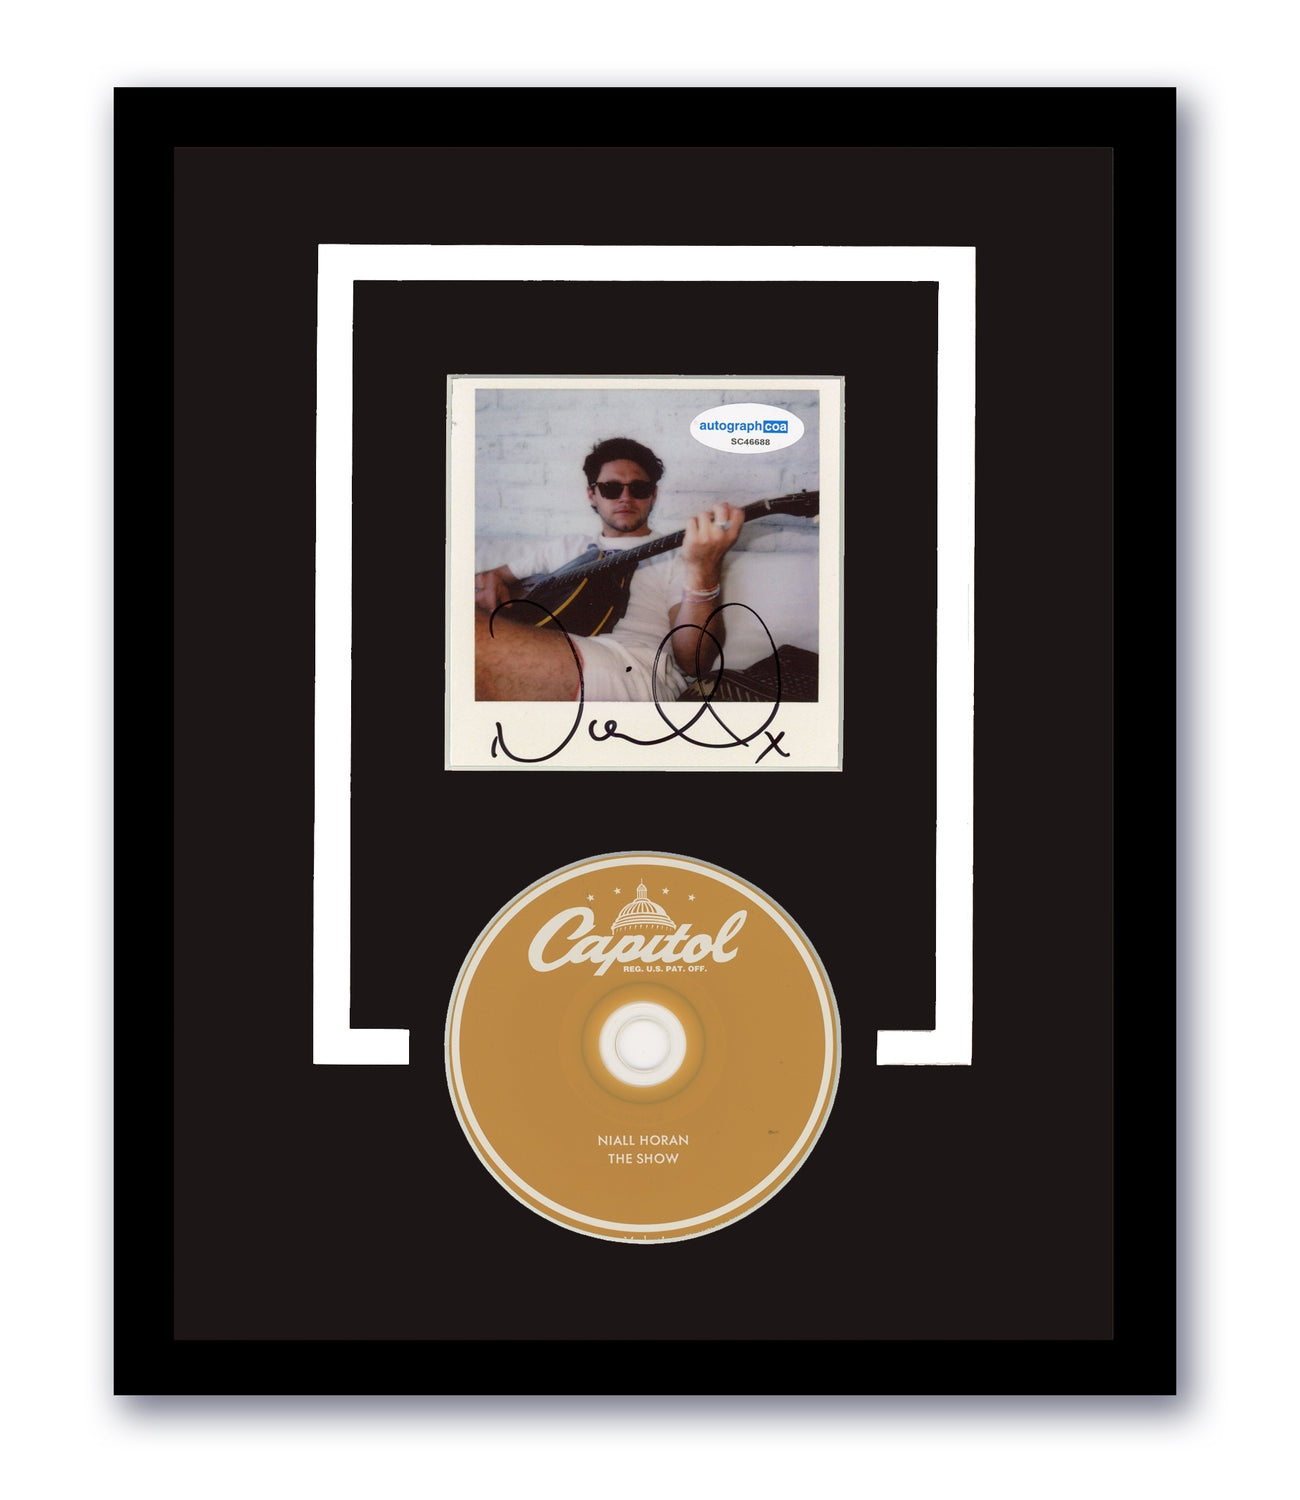 Niall Horan Signed The Show CD 11x14 Framed Autographed ACOA